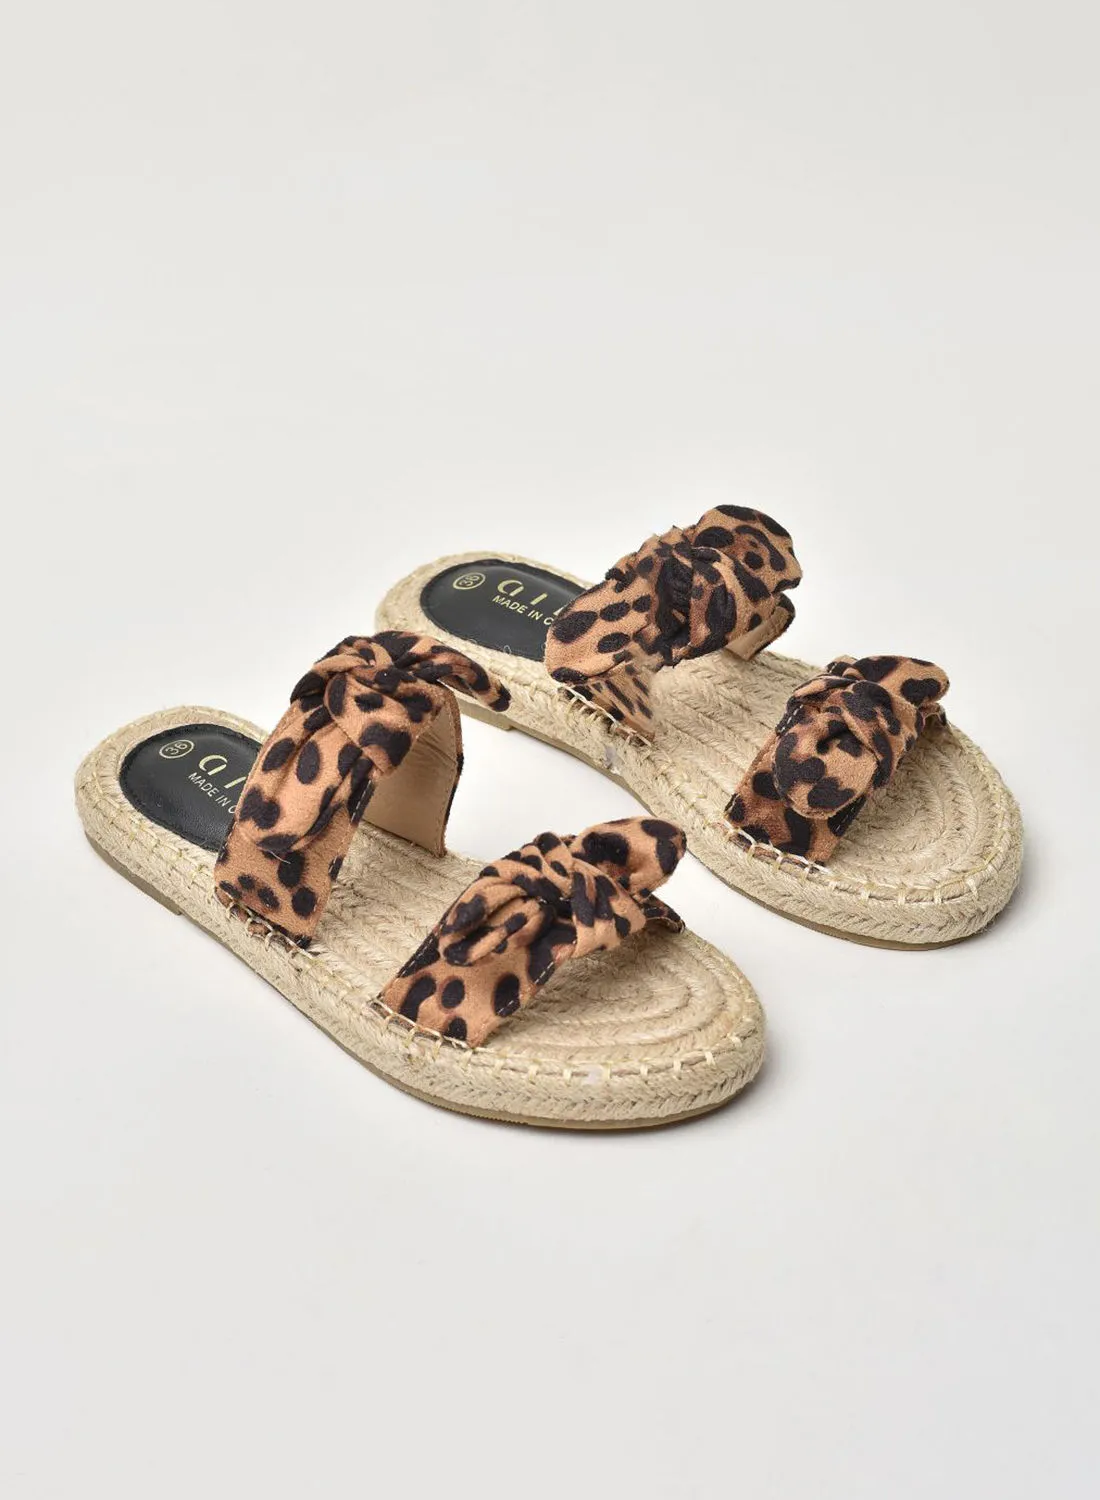 Aila Animal Printed Double Strap Flat Espadrille Sandals Brown/Black